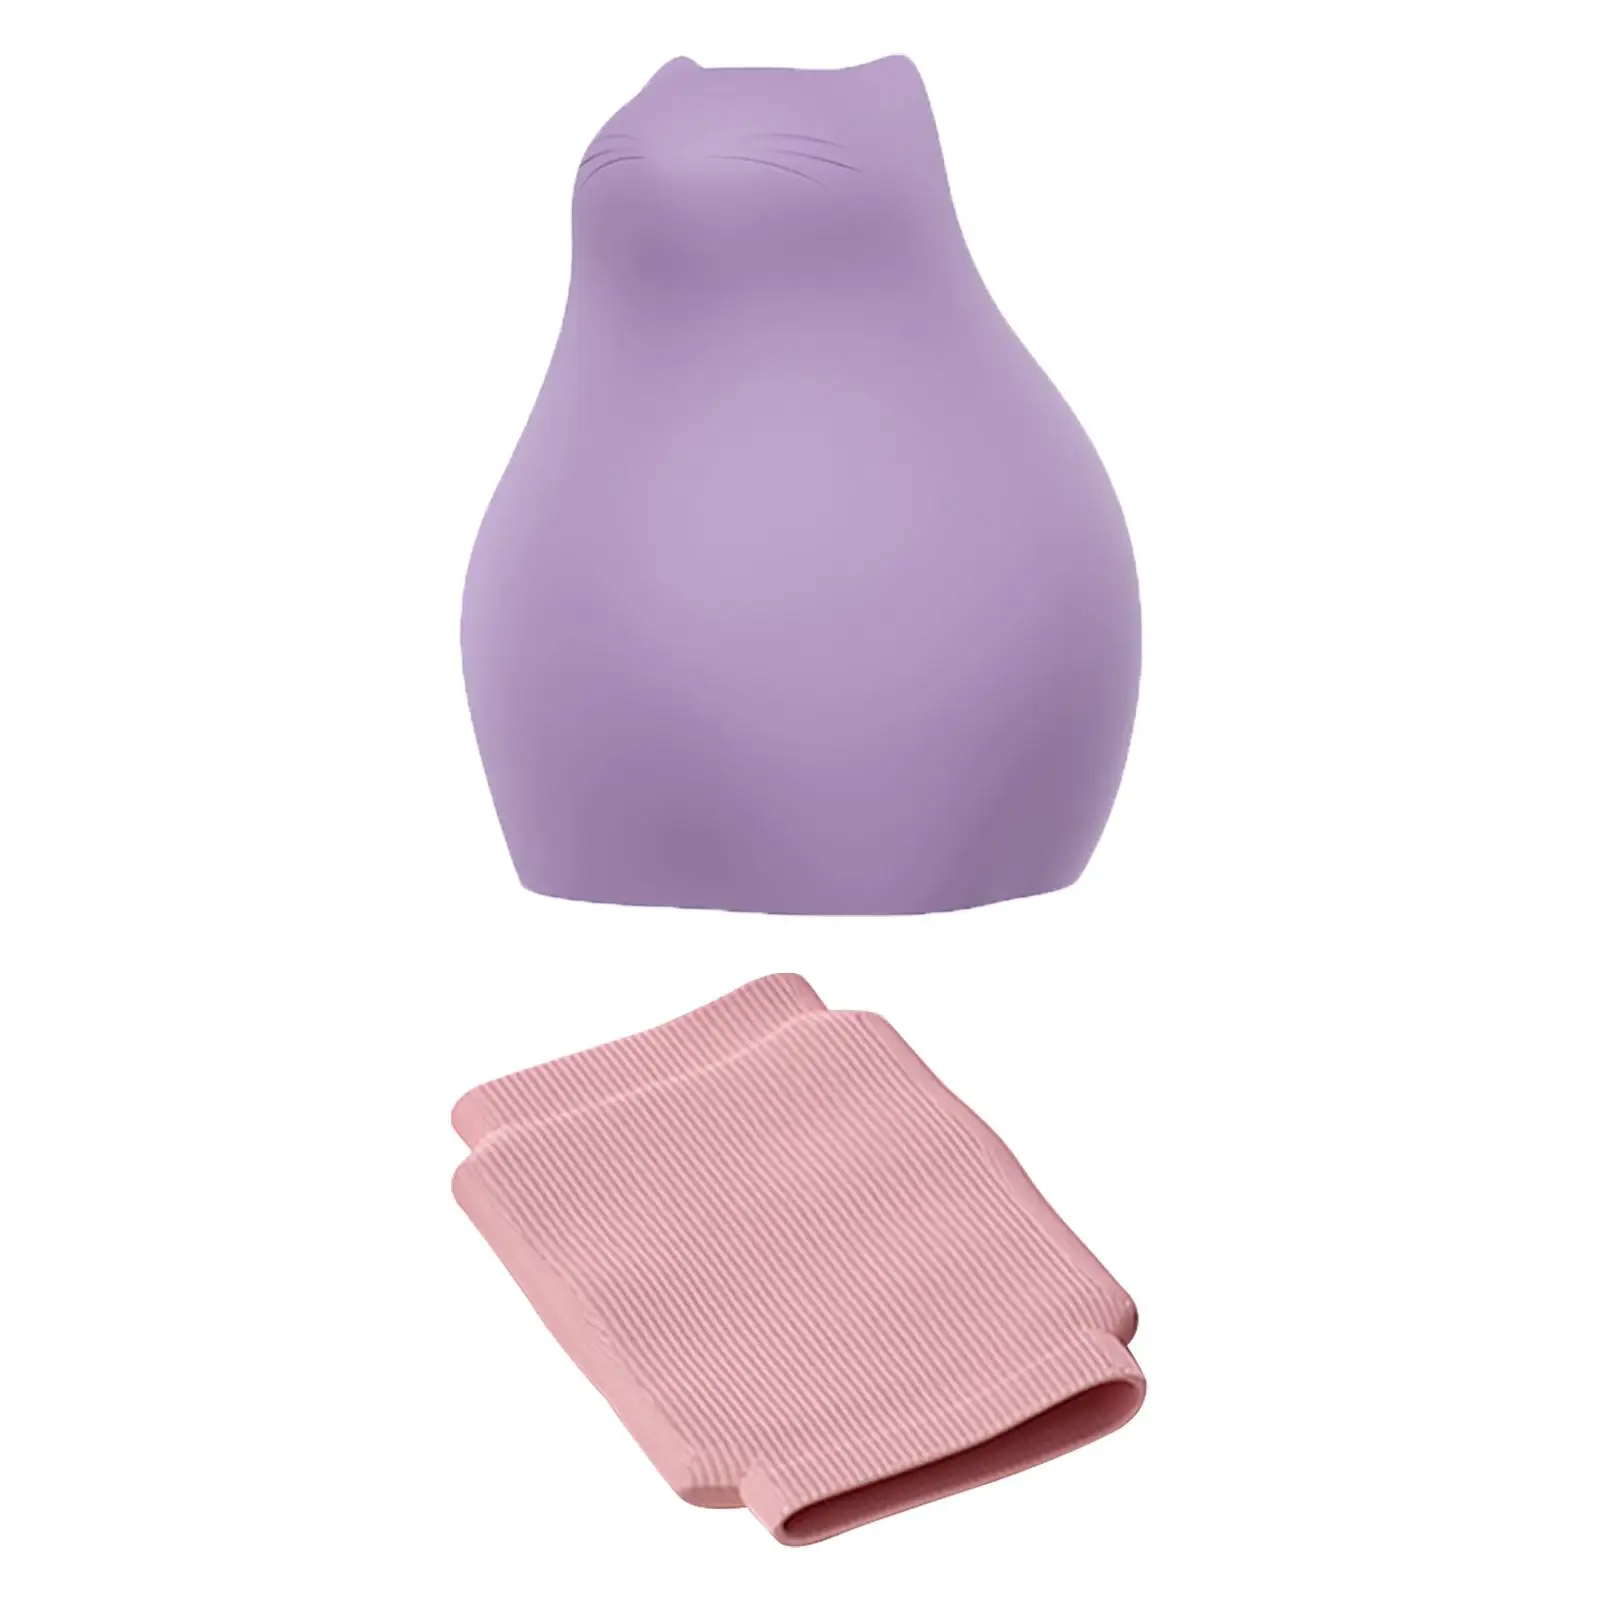 Silicone Hot Water Bag Soft Hot Water Bag Microwave Heating Portable Hand Warmer Warm Water Bag for Hand Feet Travel Office